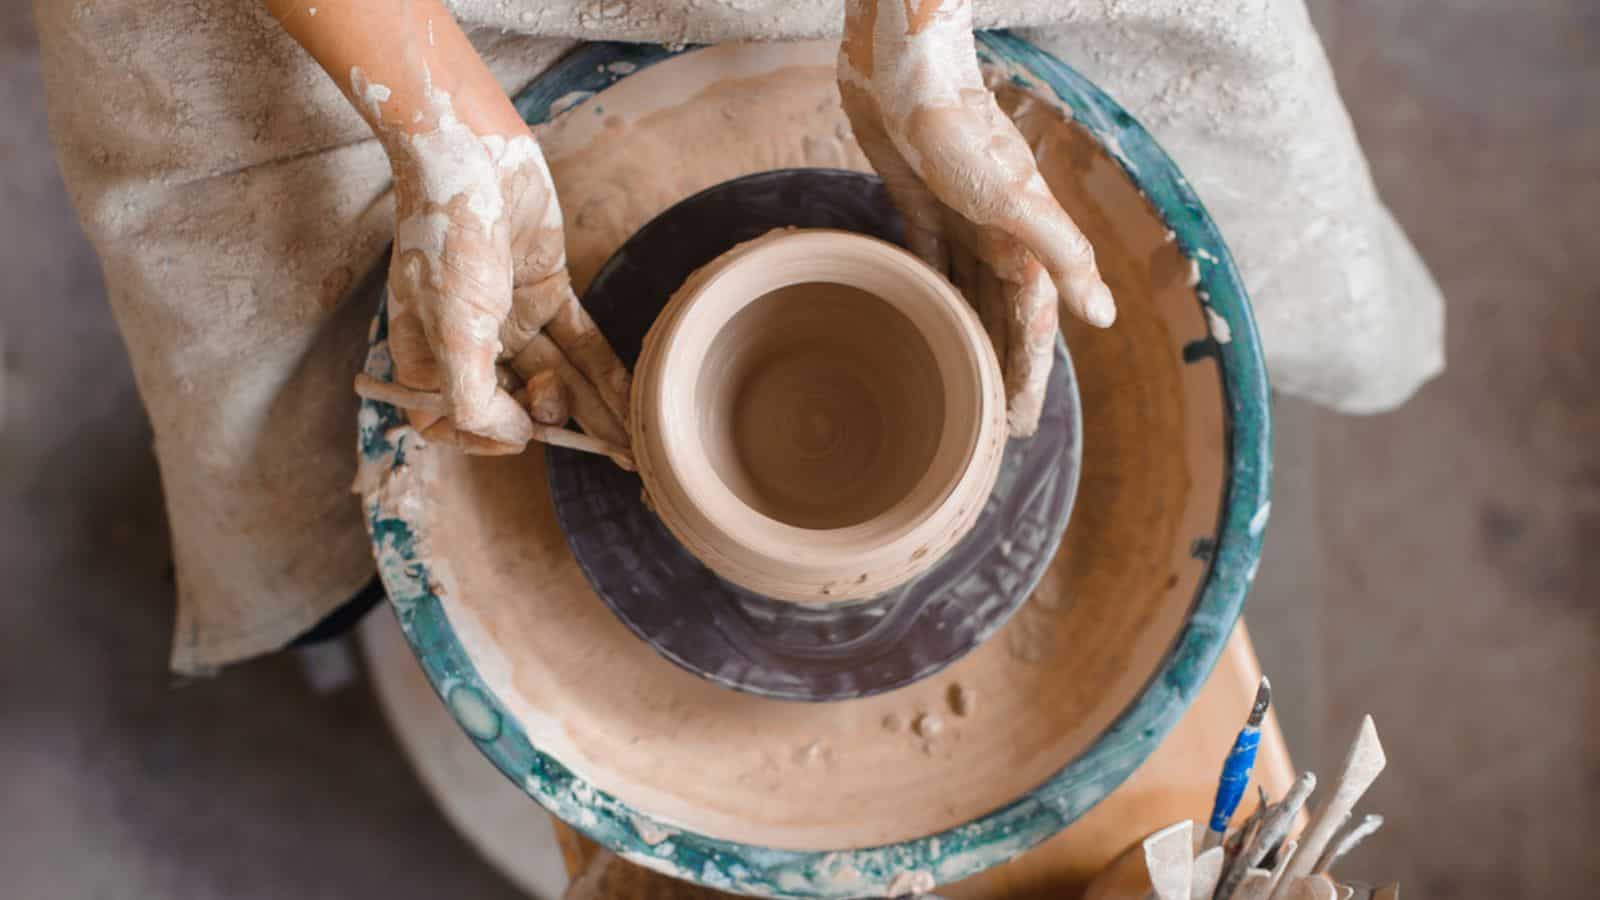 New Potter teaches how make clay pot